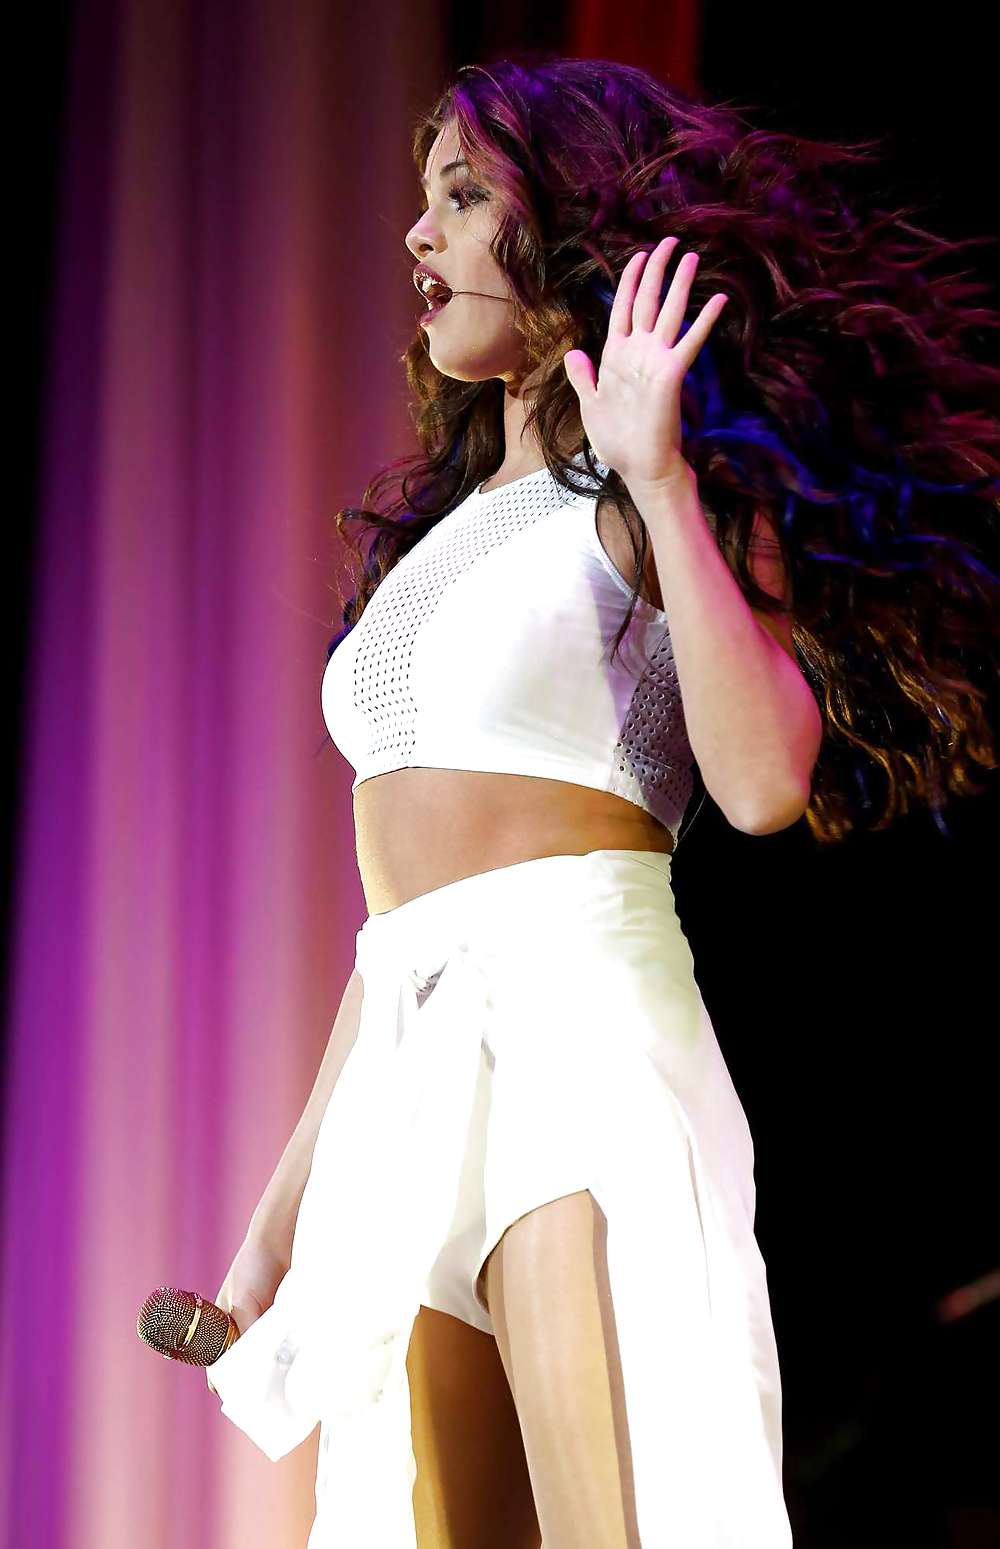 Selena Gomez - Pics from a hot live perfomance #22596297